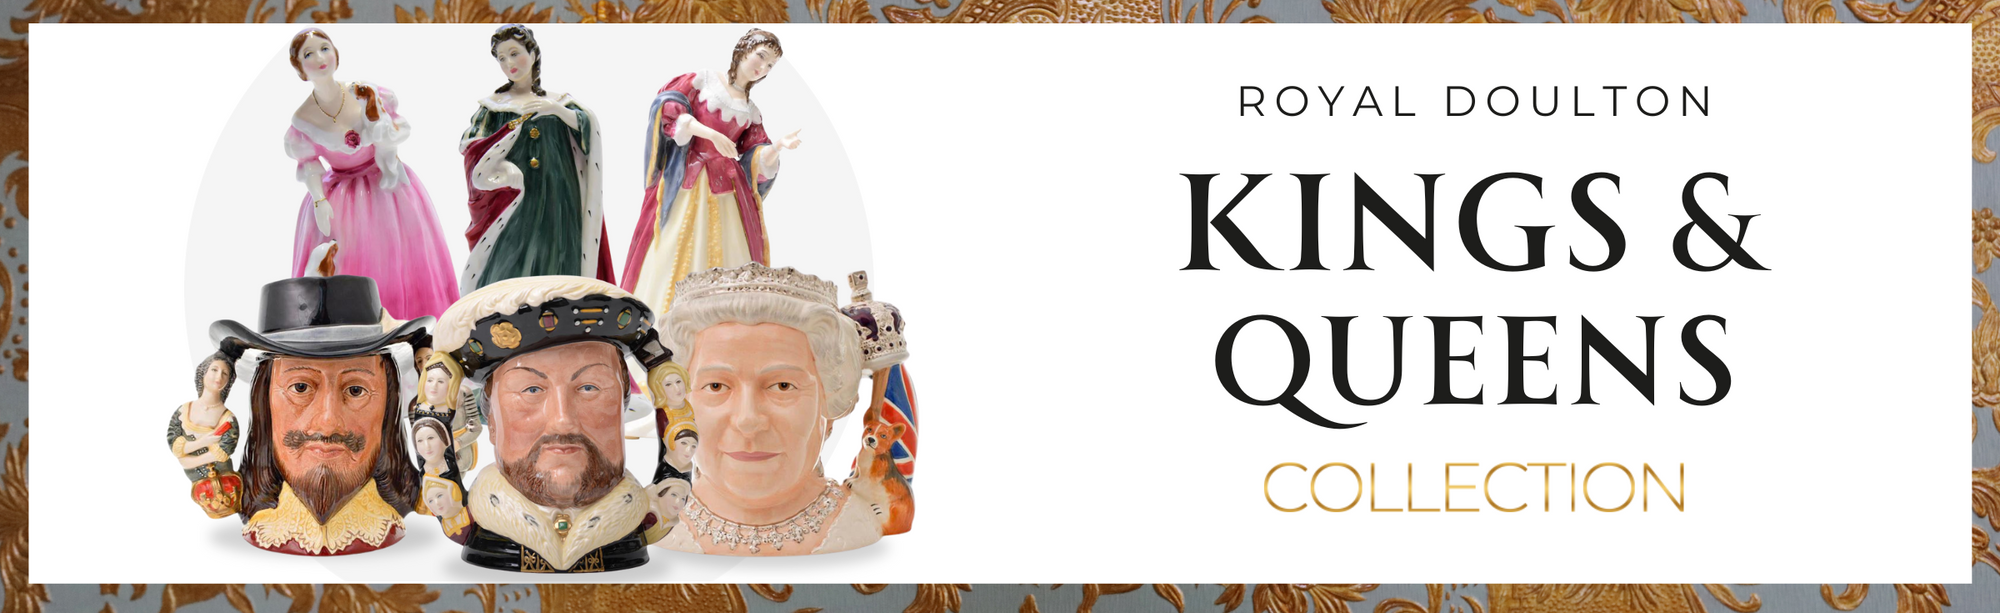 A Royal Rendezvous: The Majesty of Royal Doulton's Kings and Queens Collection